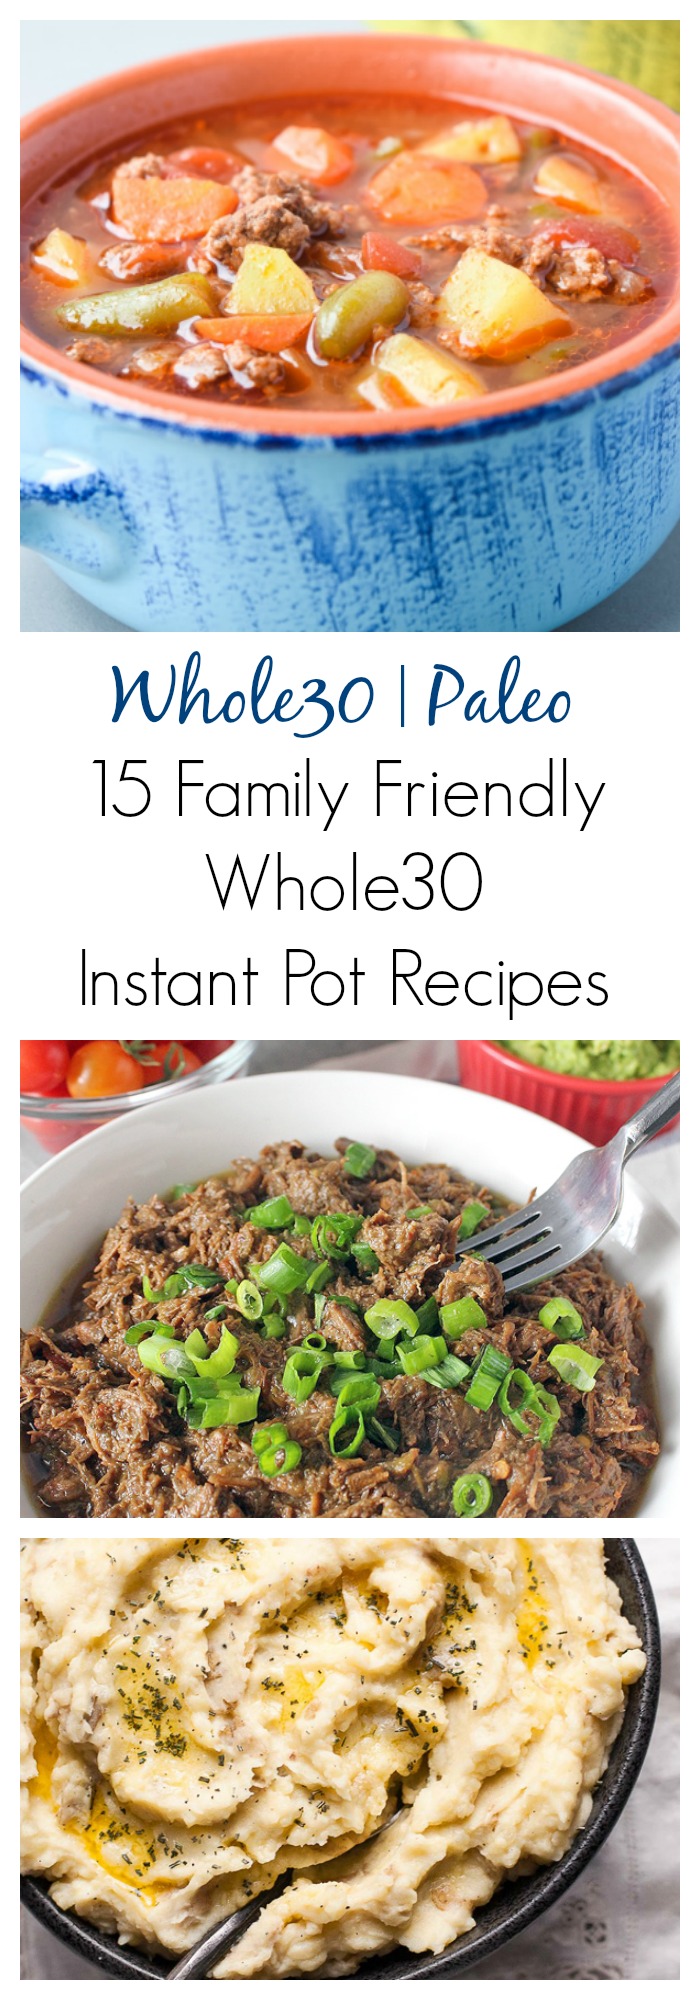 15 Whole30 Instant Pot Recipes - 20 superb Family-Friendly recipes for the Instant Pot that are Paleo/Whole30 compliant. | tastythin.com